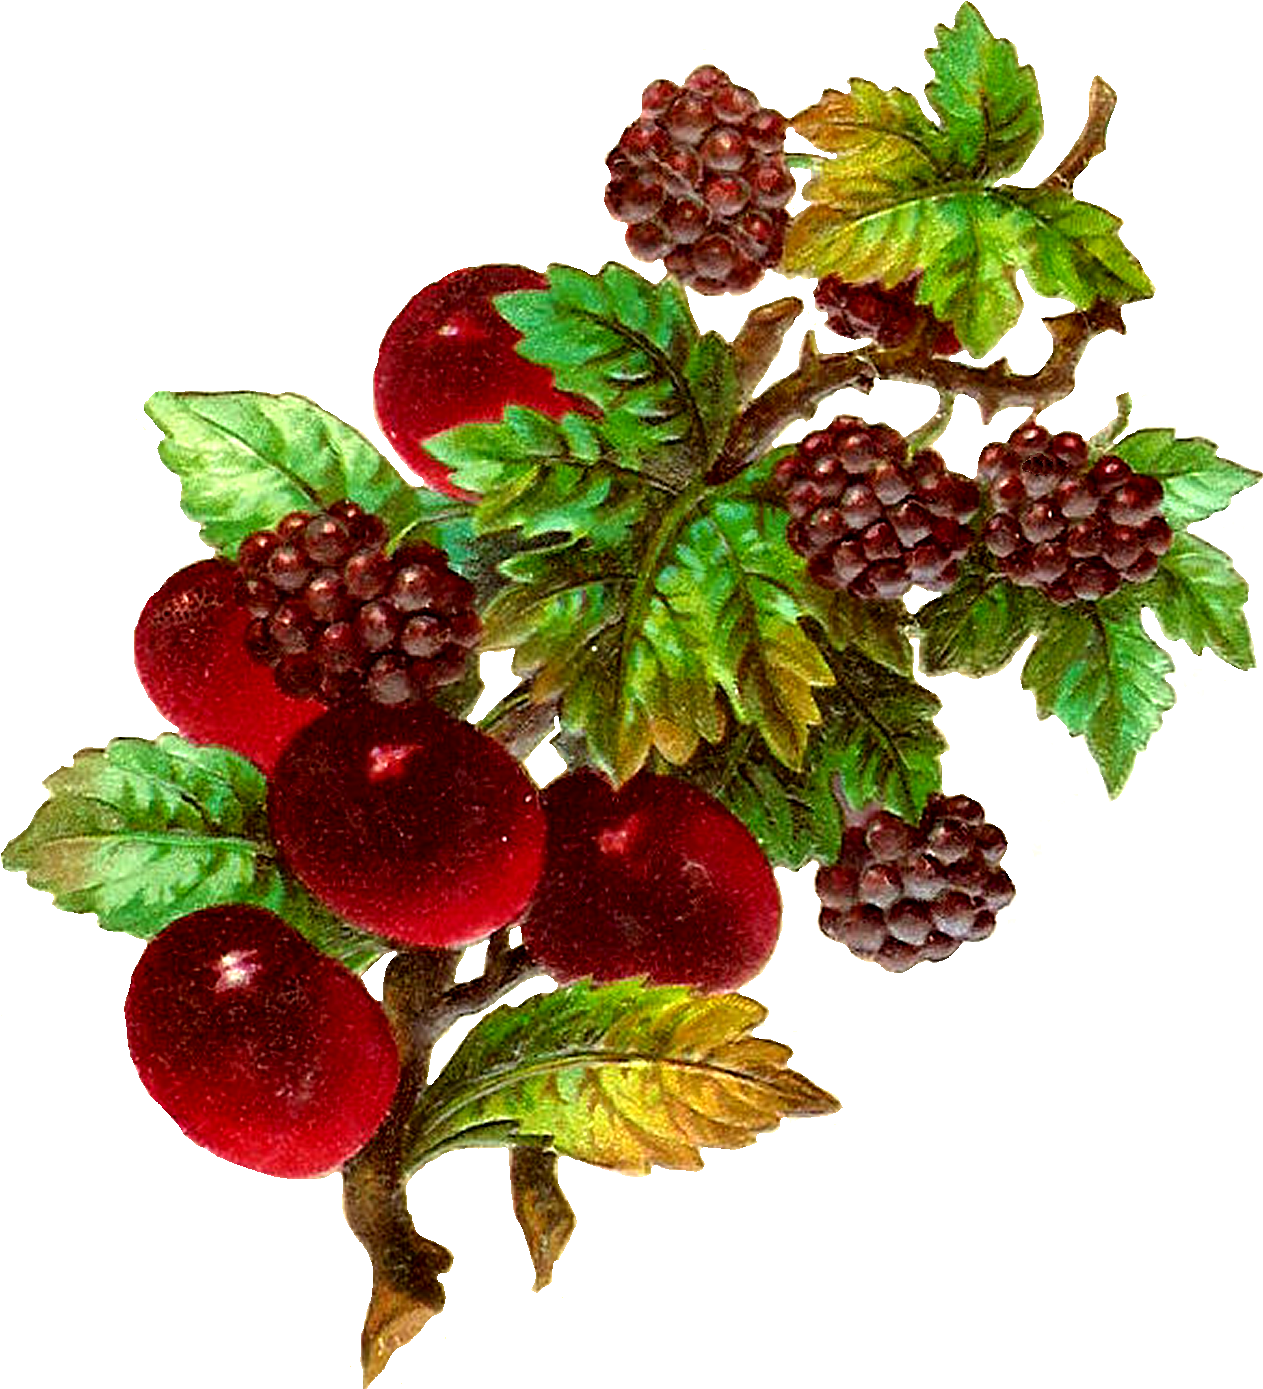 Vintage Digital Fruit Plum And Blackberry Clip Art - Tips From The Old Housewives (1422x1500)